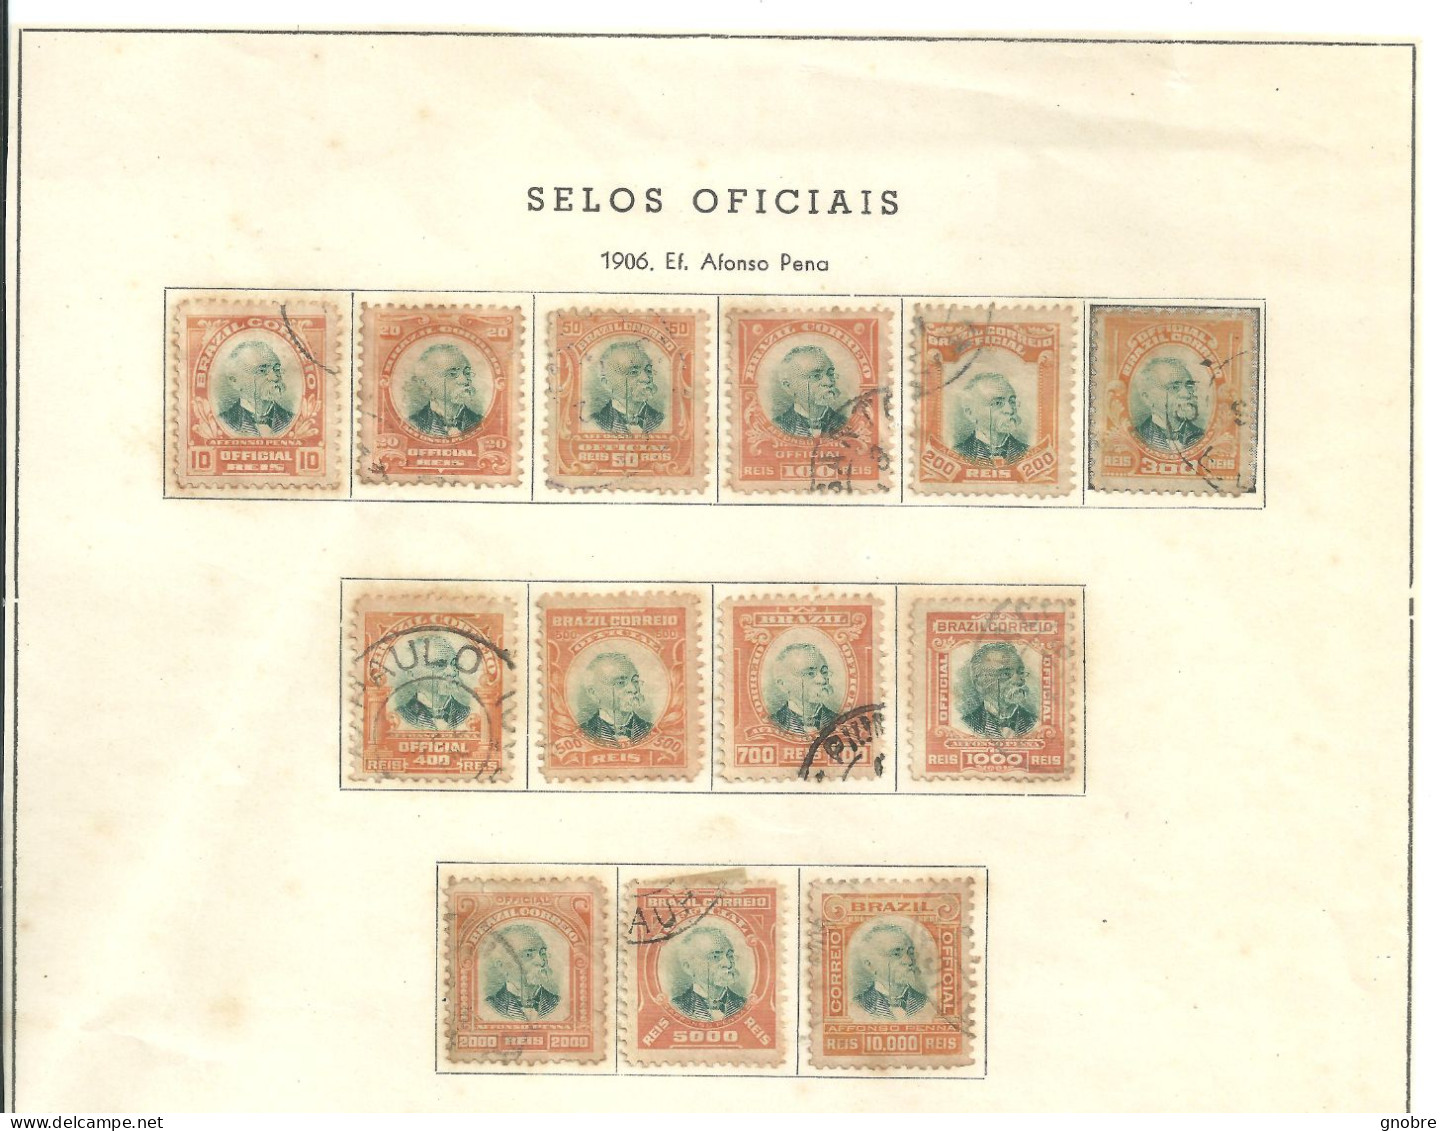 BRAZIL 1906 - AFONSO PENA - 13 STAMPS- ALL SERIE - OFICIAIS - RHM O01 - O13 - USED - Used Stamps